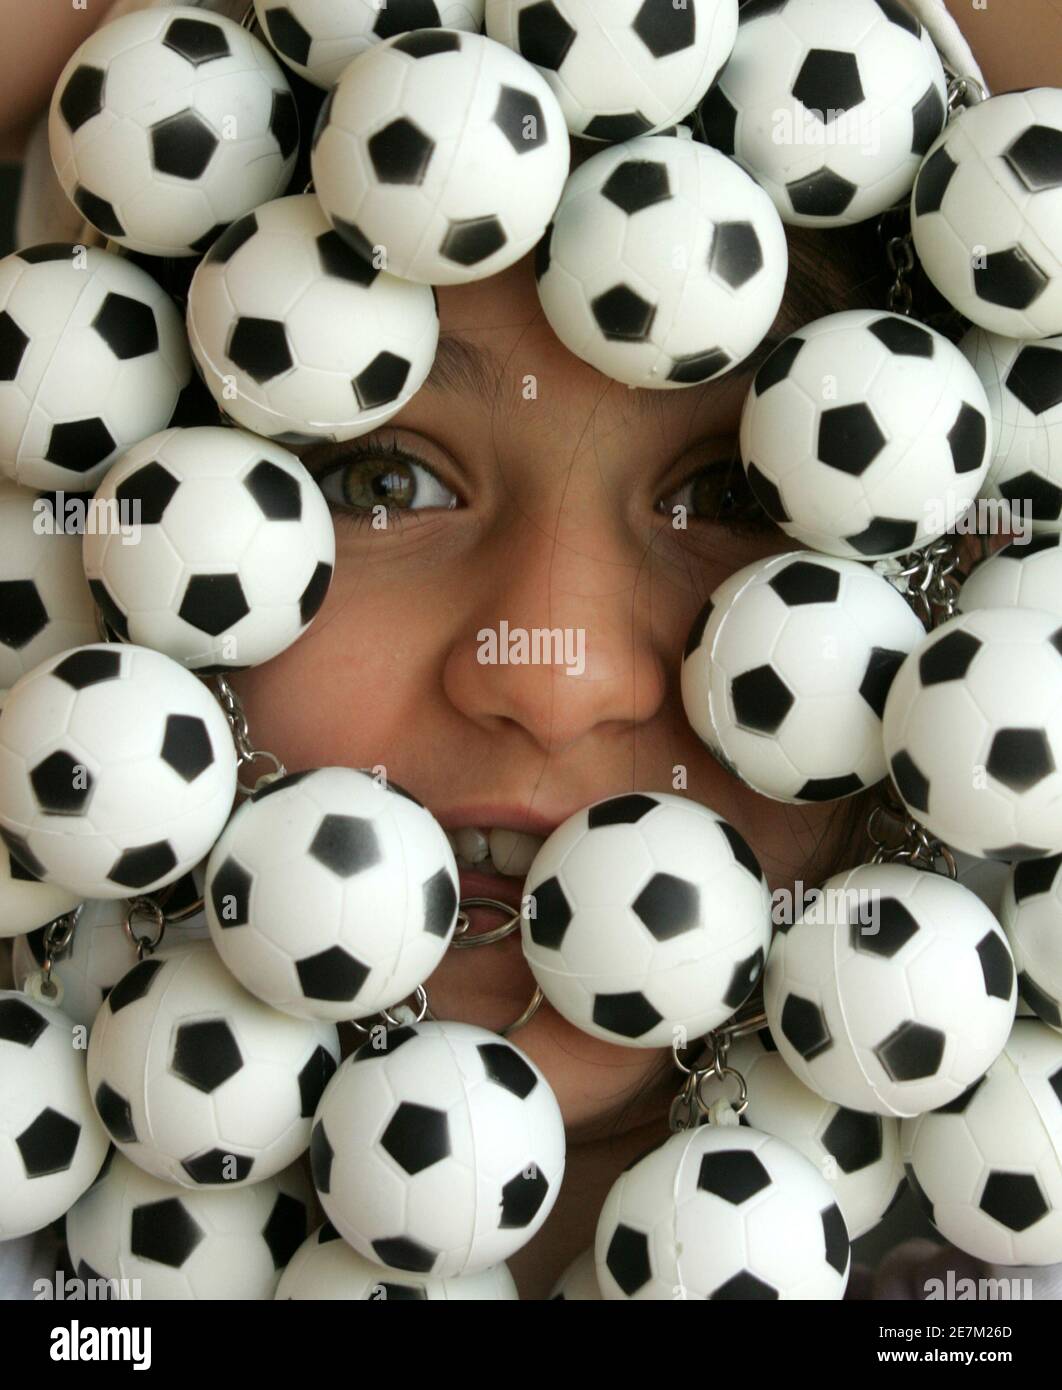 Jordanian girl display small soccer balls for sale at Friday Jara souq in  Amman June 9, 2006. The World Cup 2006 will be opened with the match  Germany vs Costa Rica in